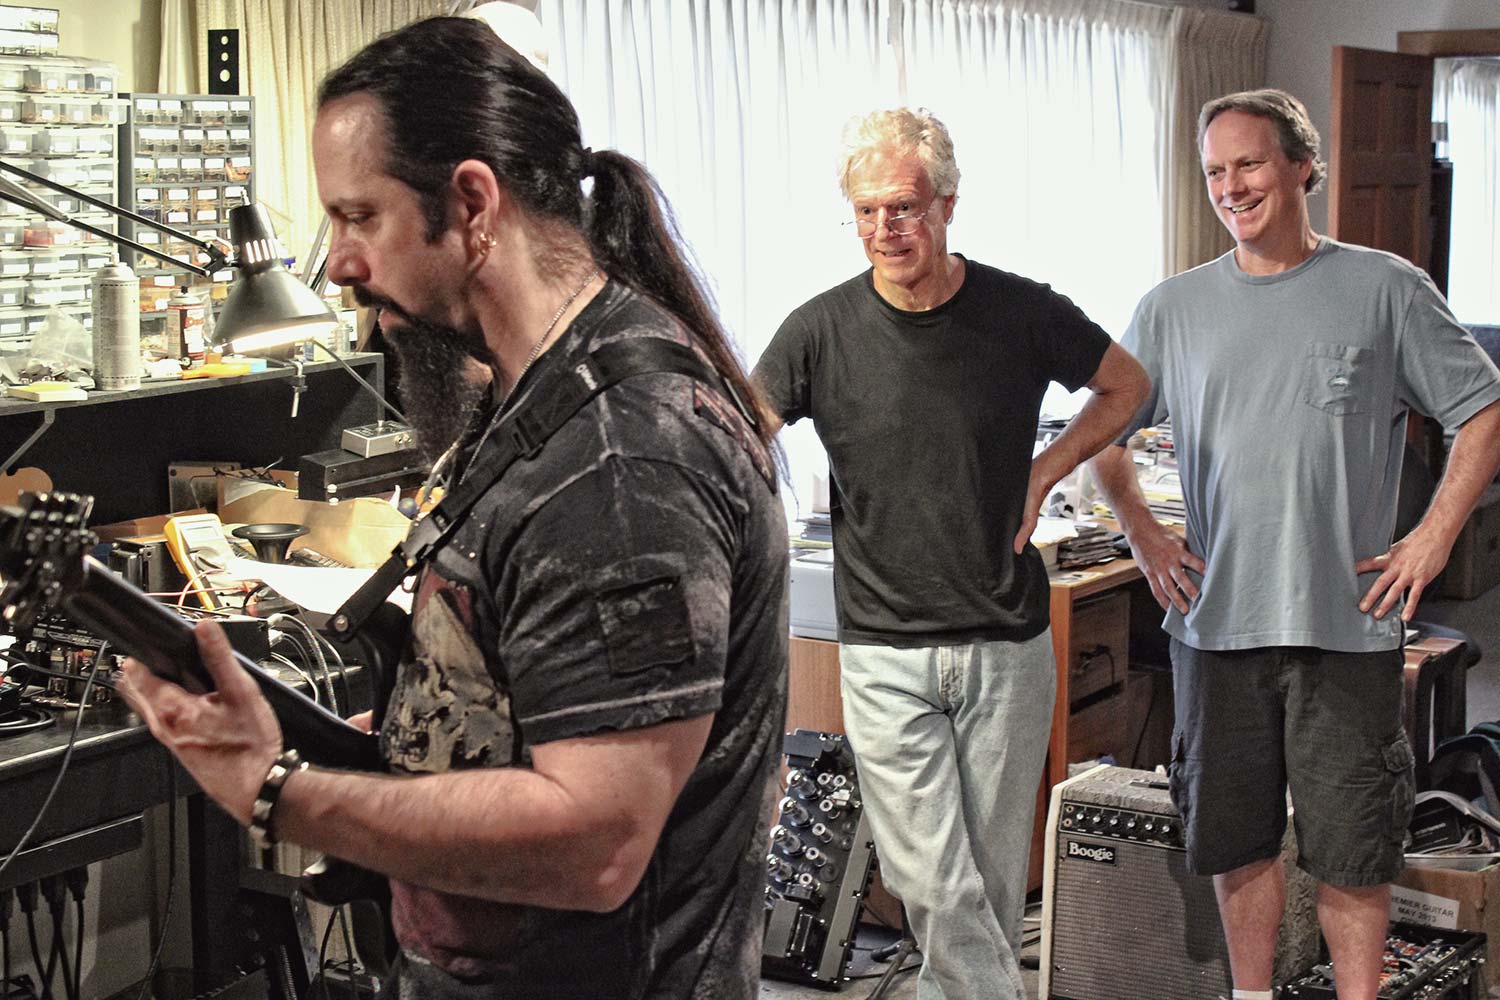 John Petrucci Playing the Mark Five: 25 Prototype with Randall Smith and Doug West